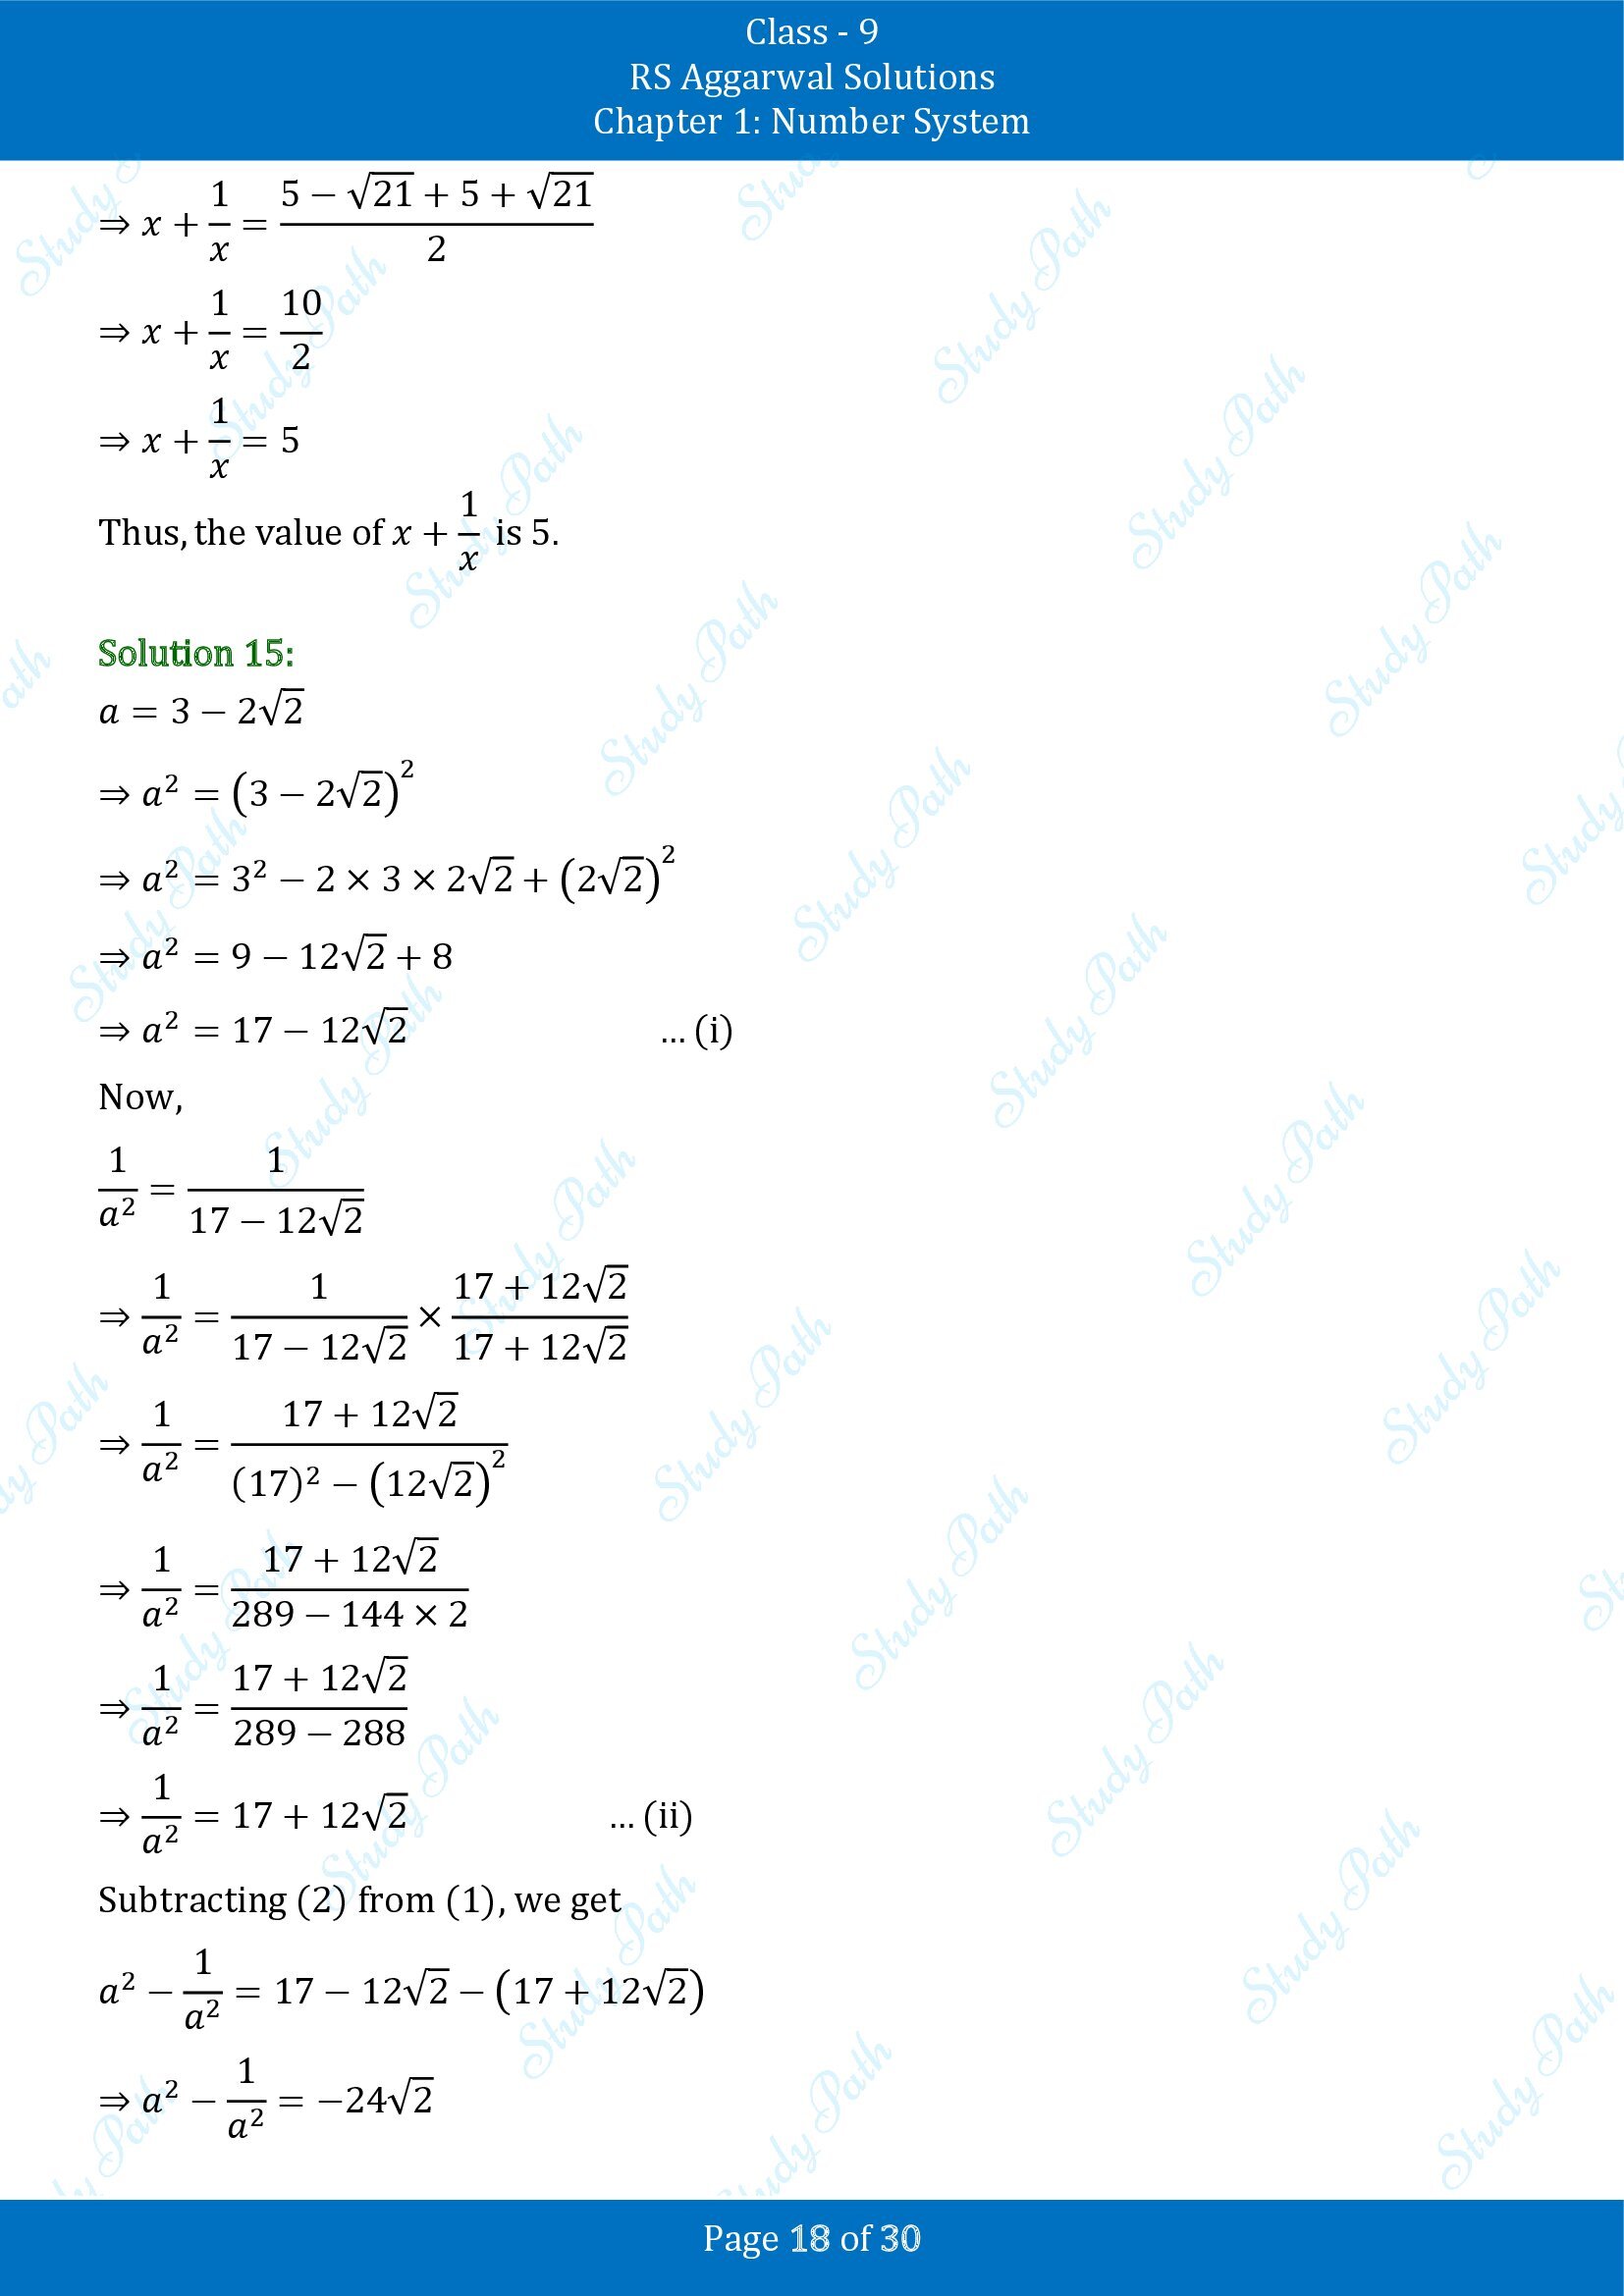 RS Aggarwal Solutions Class 9 Chapter 1 Number System Exercise 1F 00018